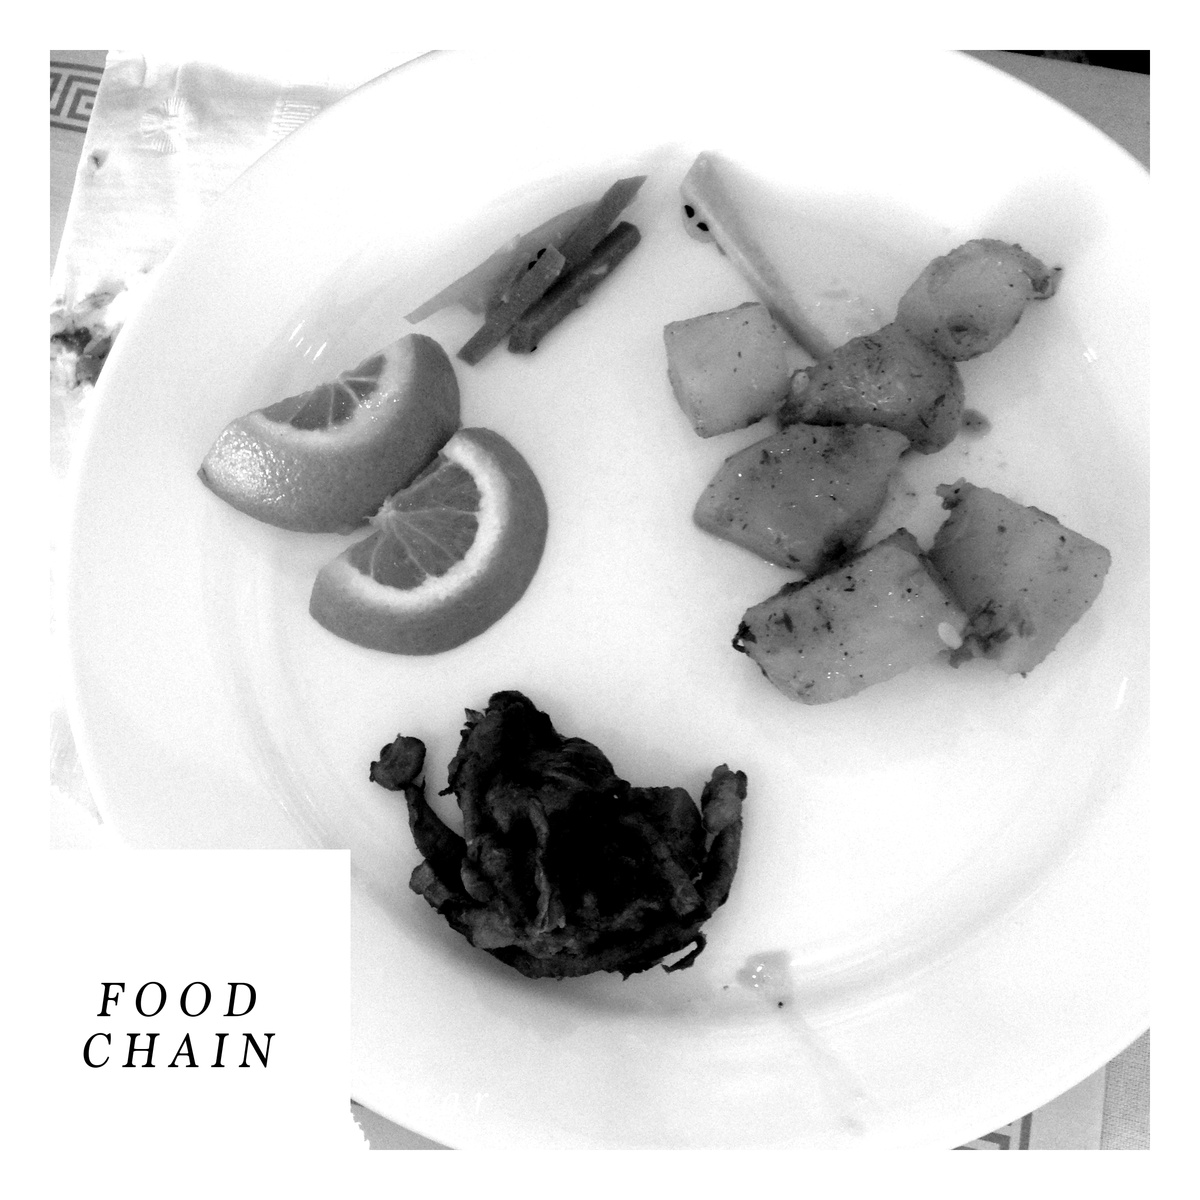 Newish Star Shares Previously Unreleased Track, “Food Chain”